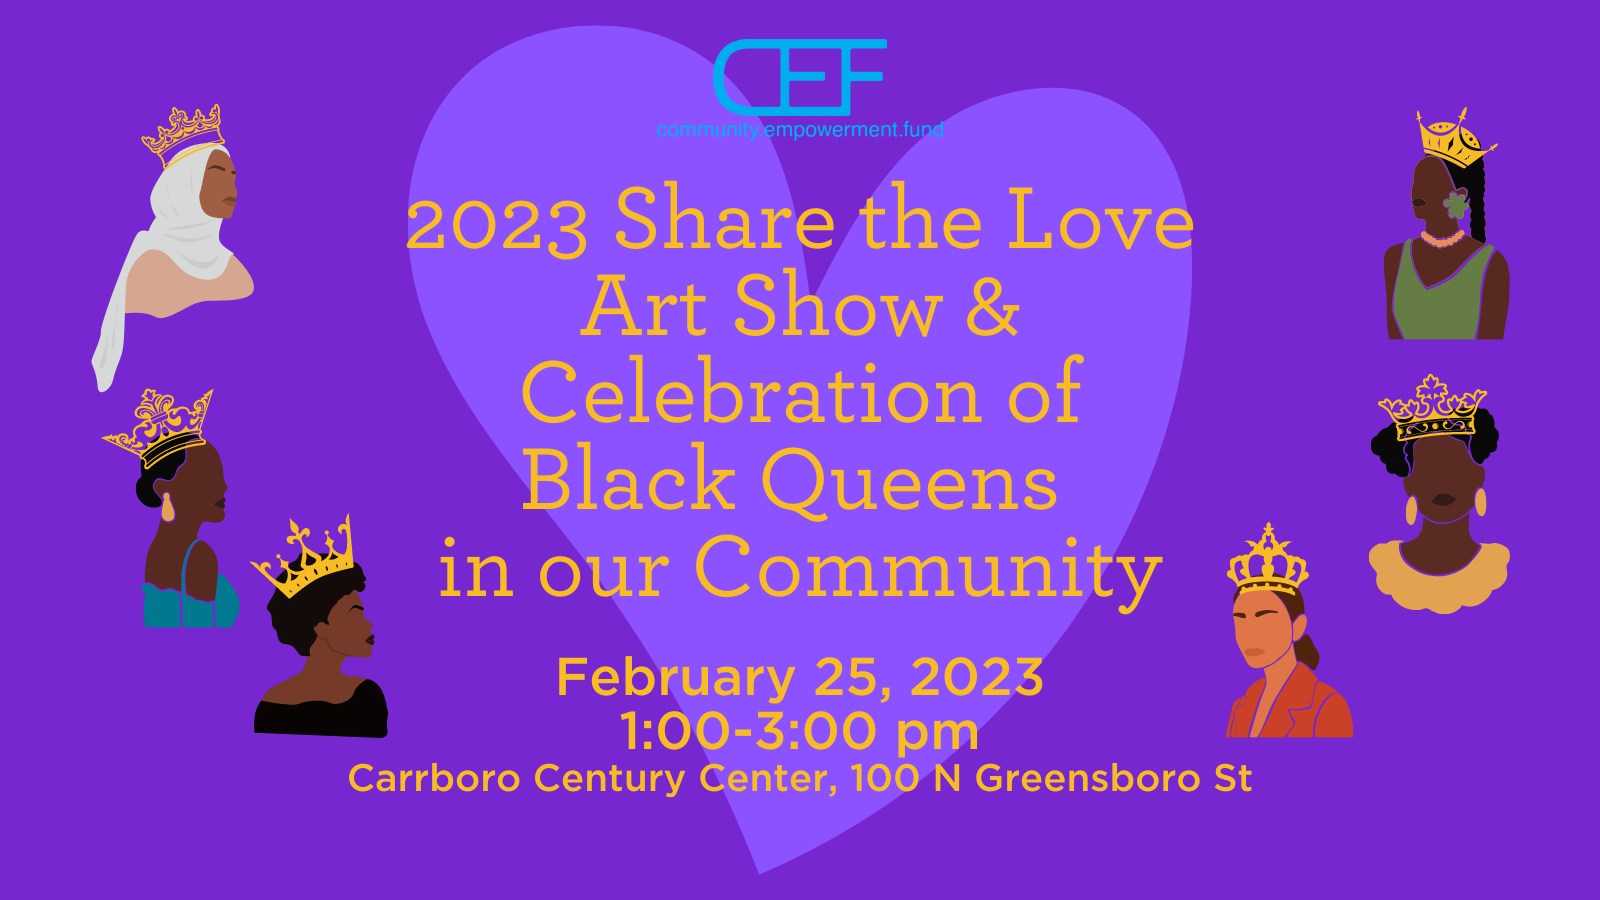 2023 Share the Love Art Show & Celebration of Black Queens in our Community February 25, 2023 1:00-3:00 pm Carrboro Century Center, 100 N Greensboro St